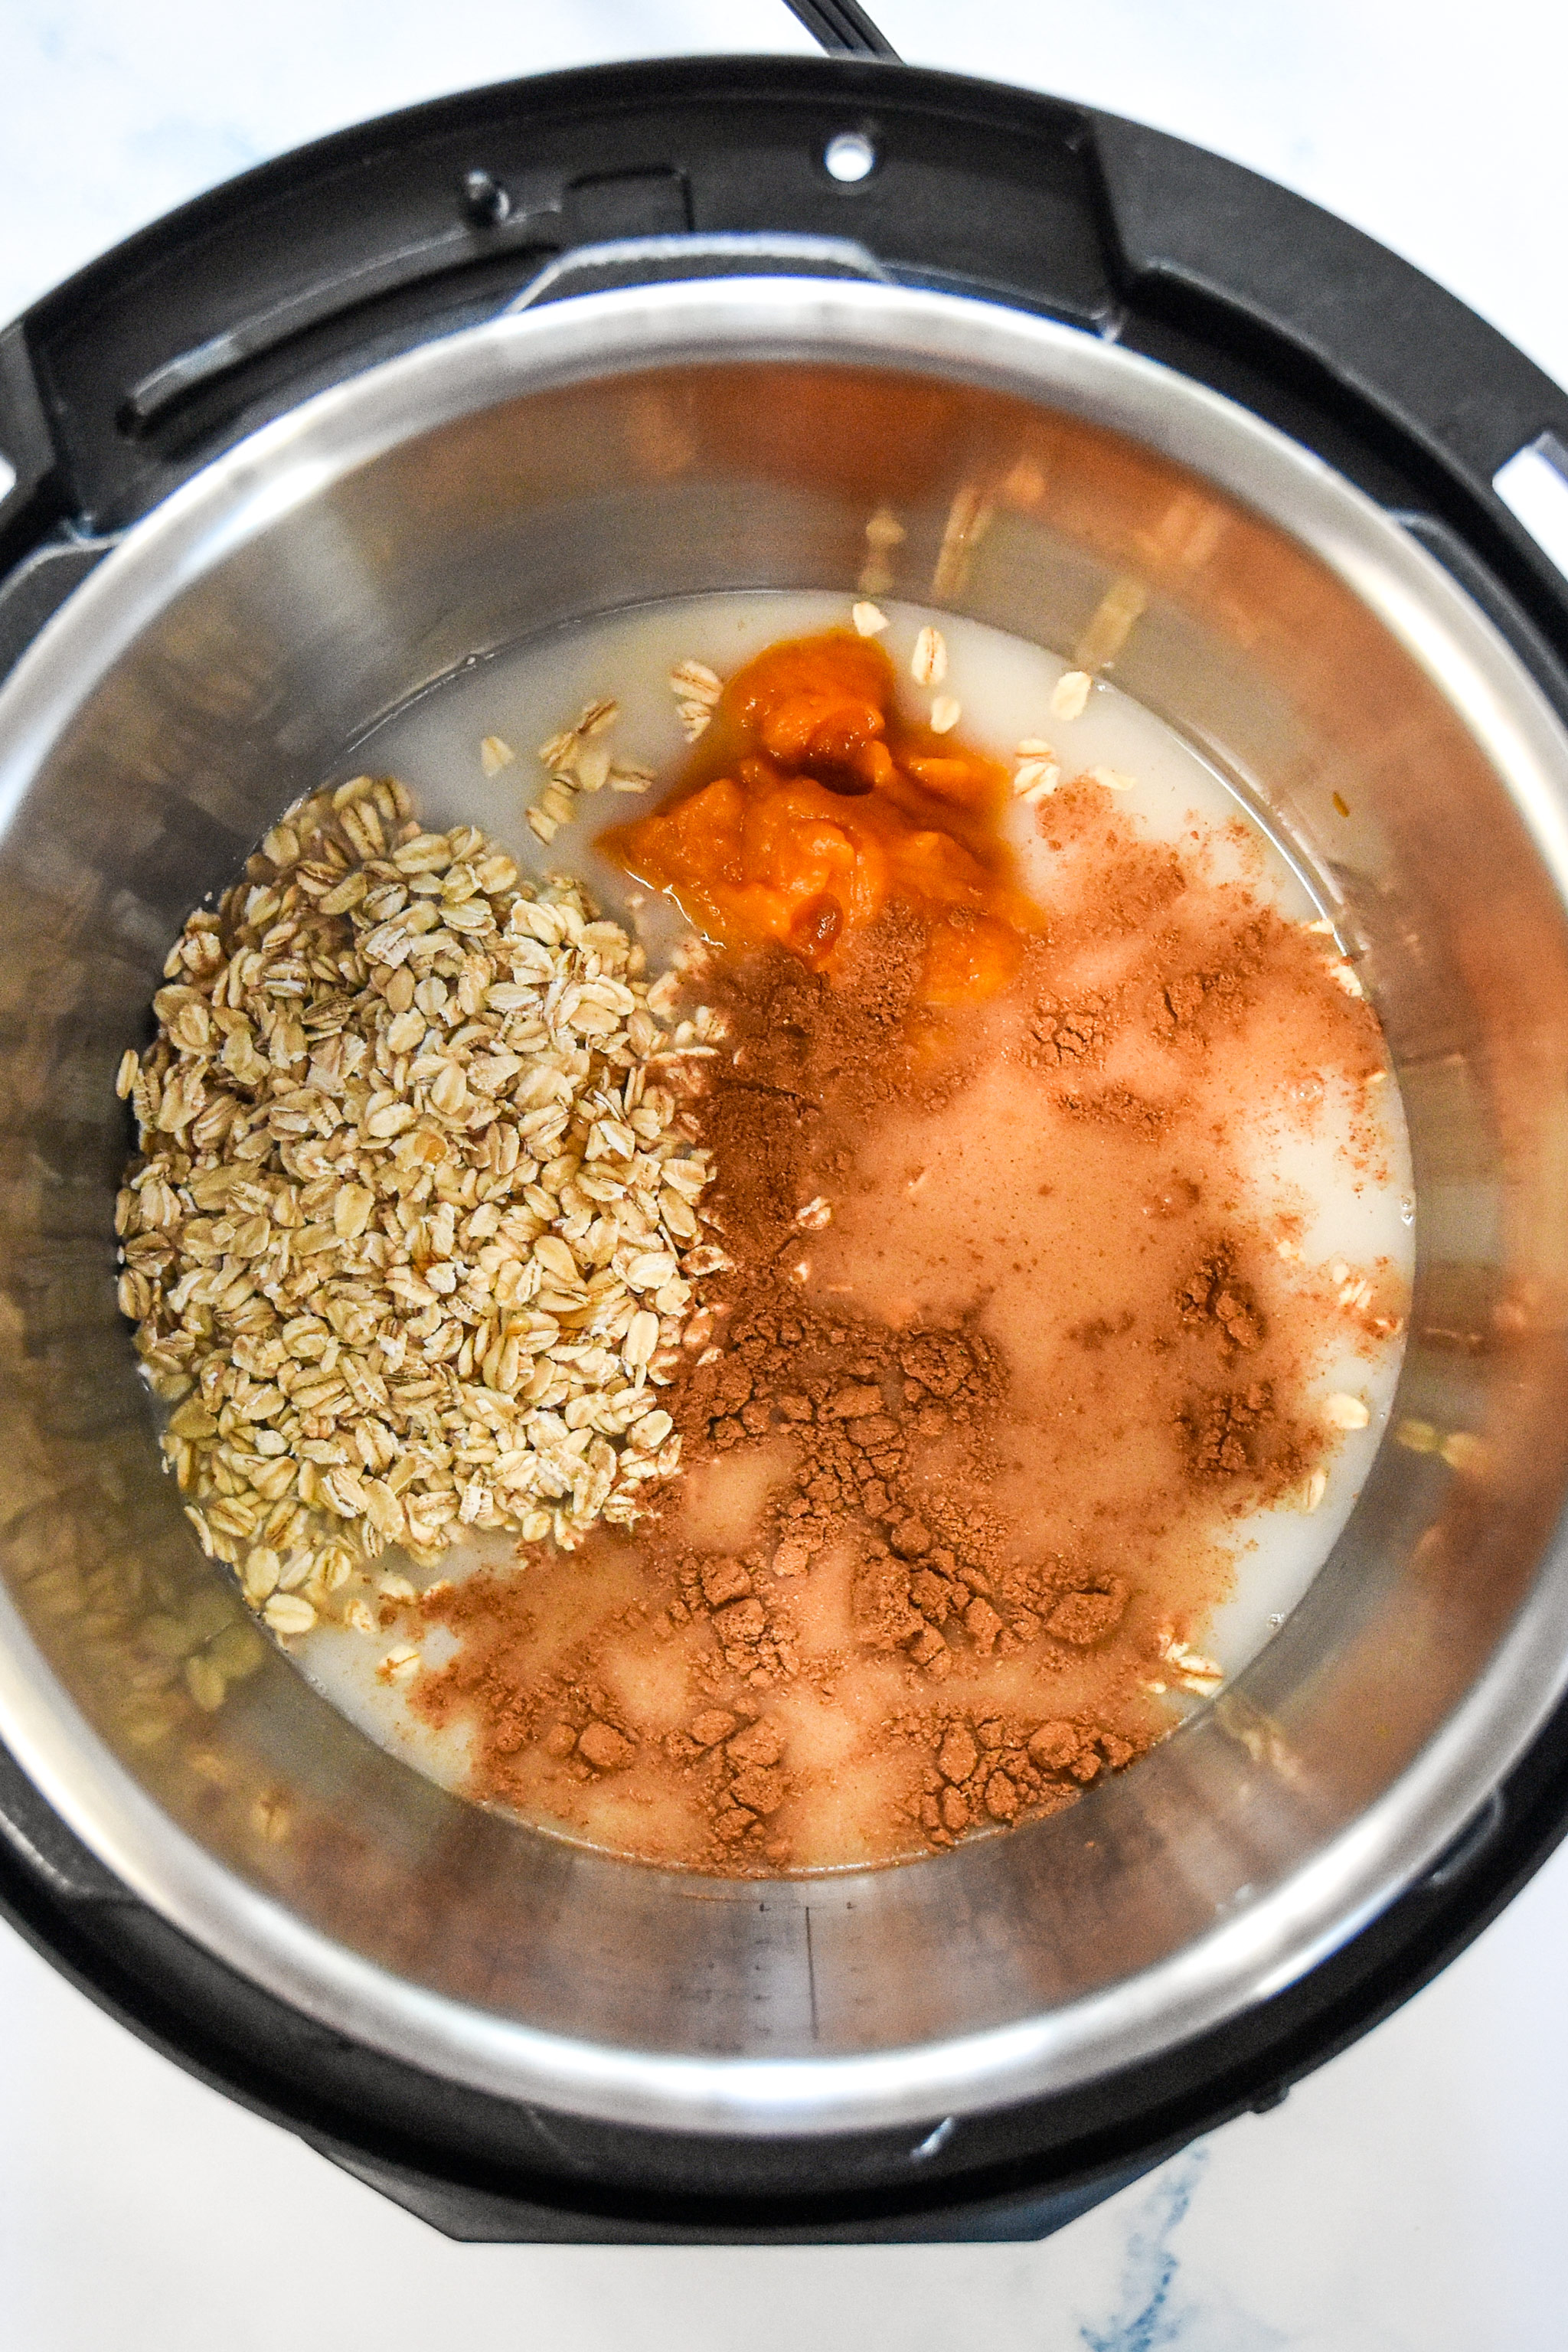 everything in the instant pot for the pumpkin spice oatmeal.